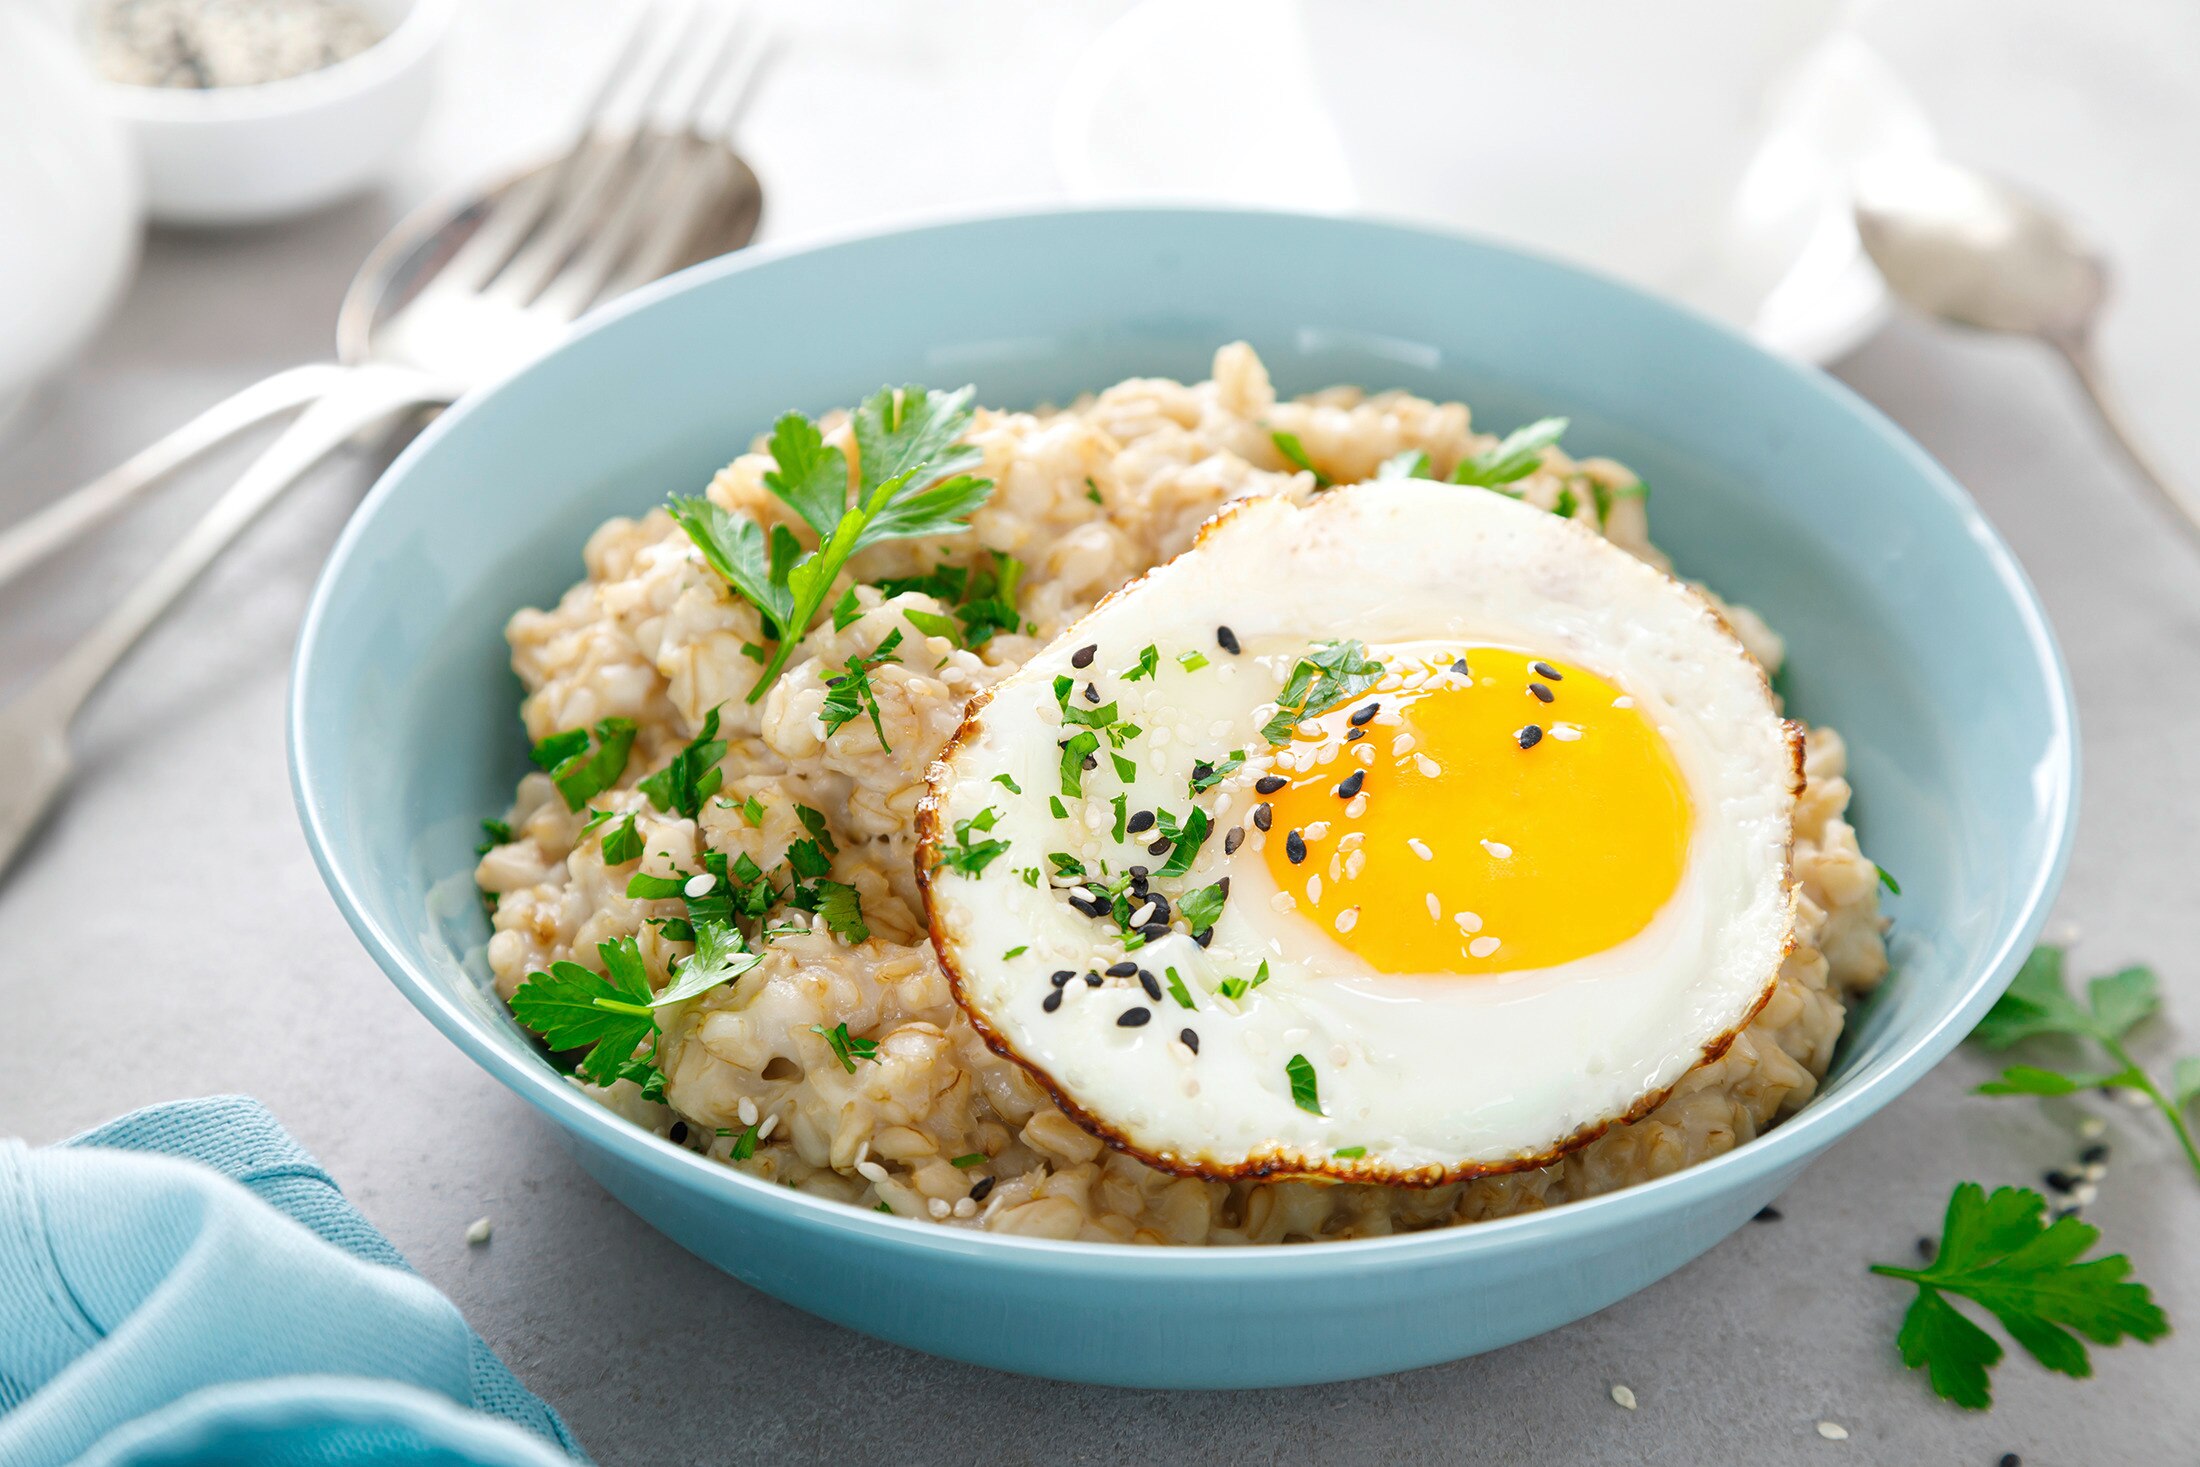 A bowl of savory oats with an egg on top, garnished with herbs